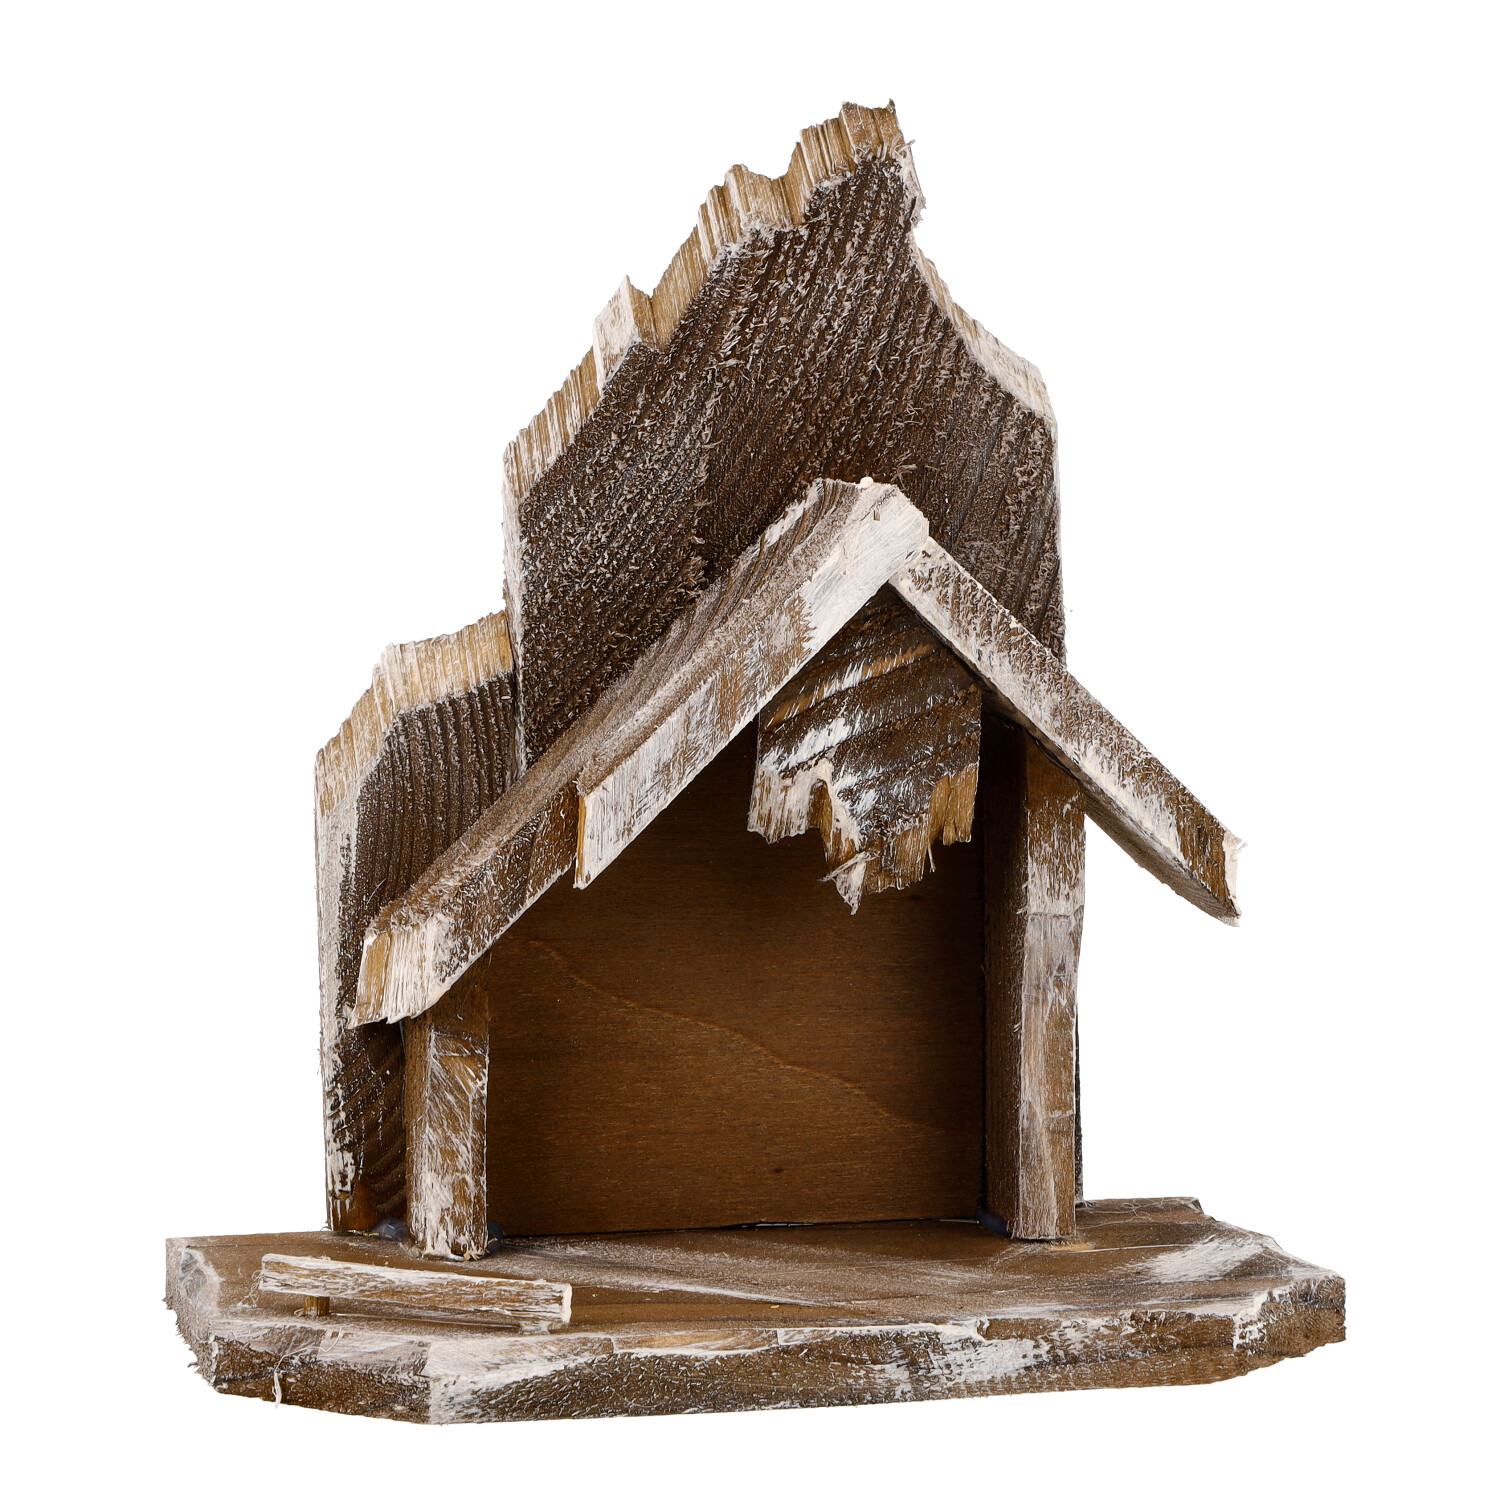 Miniature stable made of wood - Marolin - made in Germany